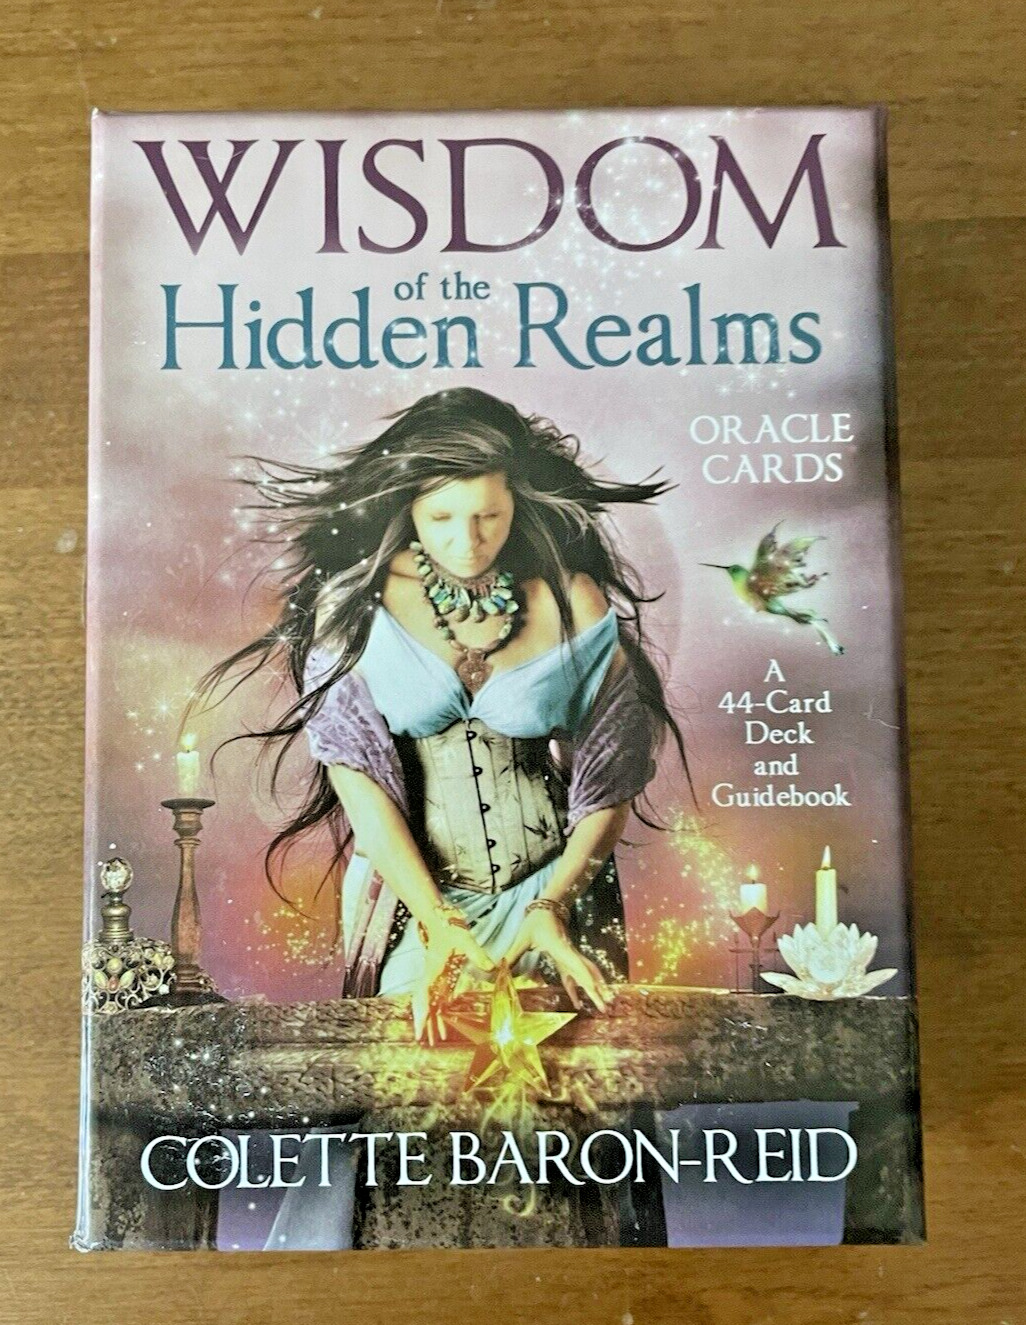 Wisdom of the Hidden Realms 44-Card Deck with Guidebook – Colette Baron-Reid